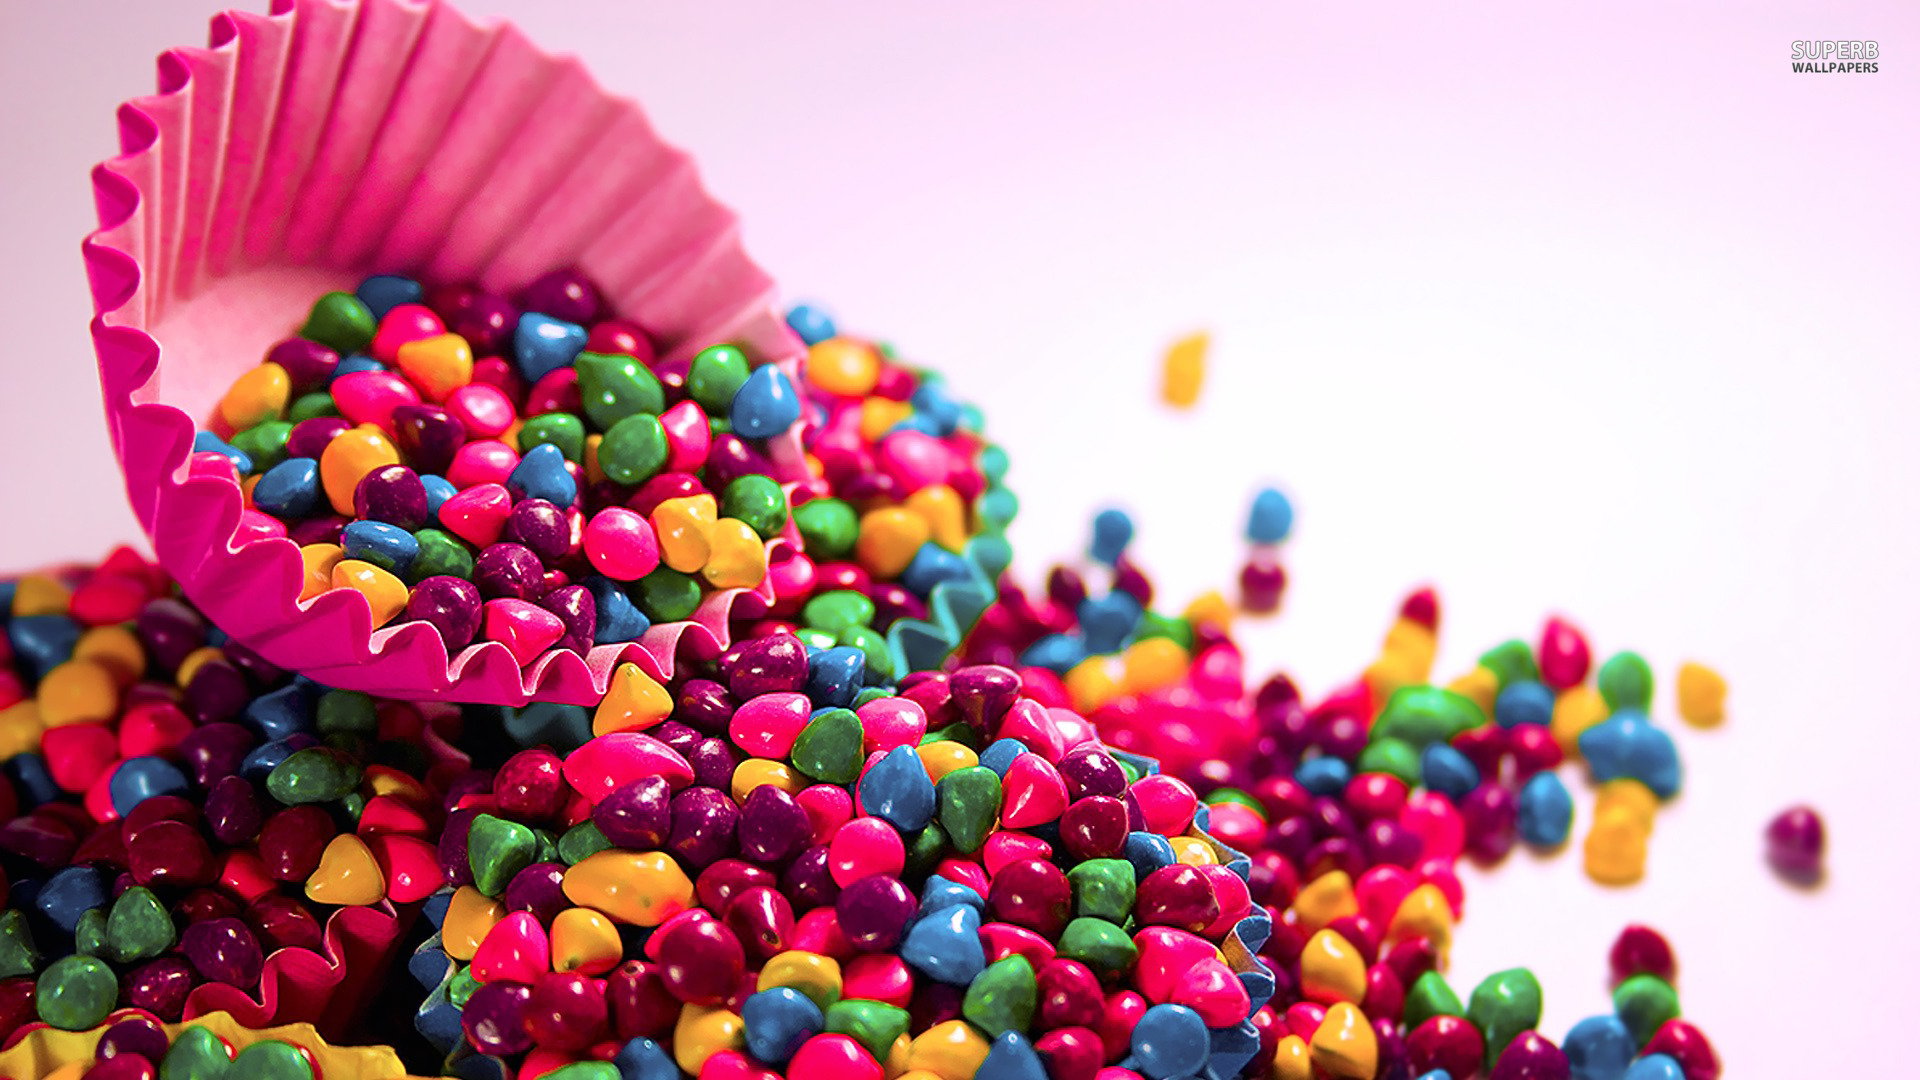 Wallpapers Candy 3 Hd Wallpaper